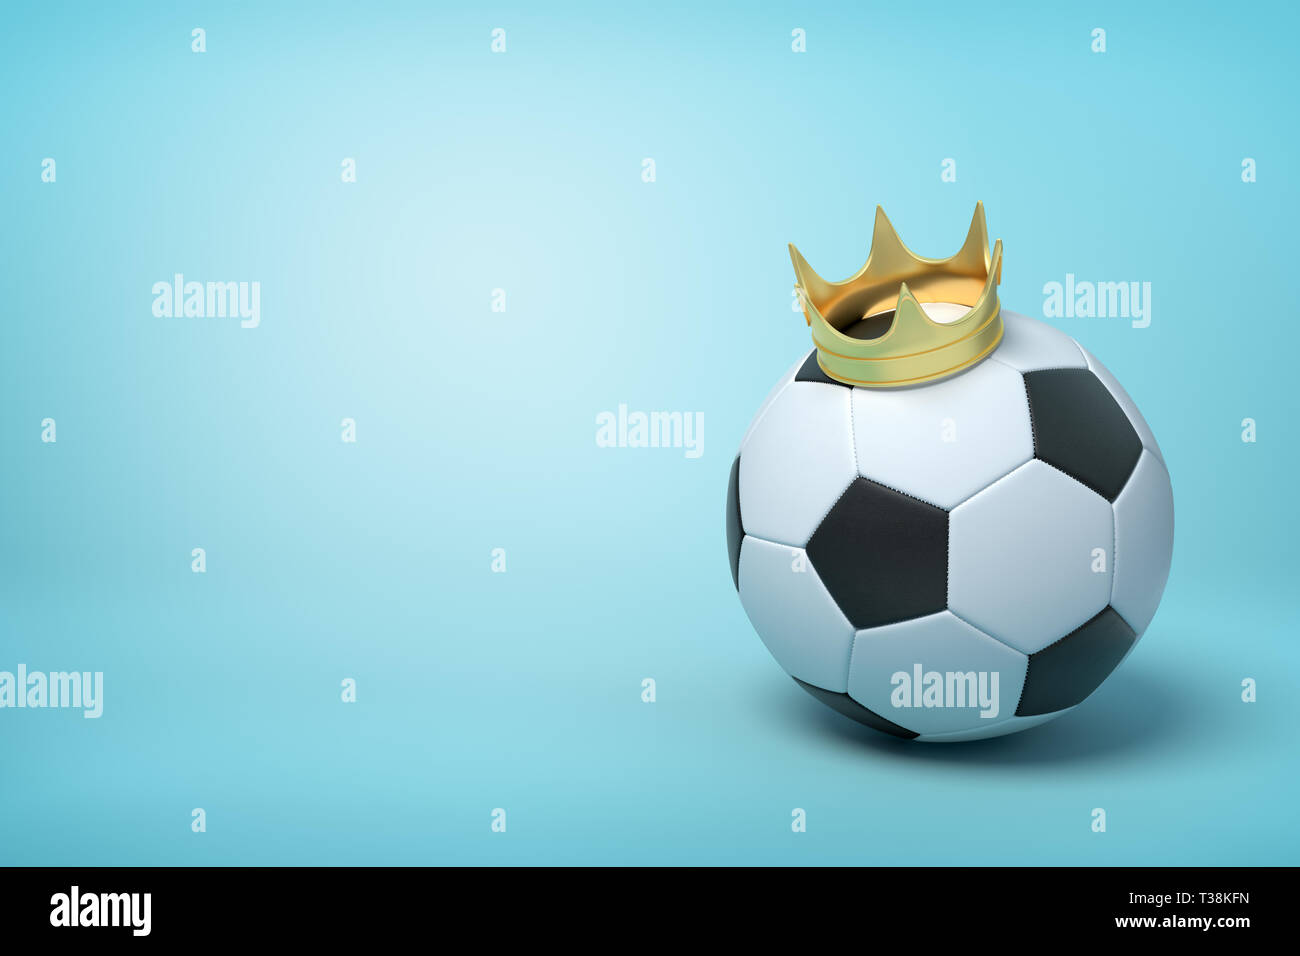 3d rendering of a football wearing a golden crown on light blue background. Stock Photo